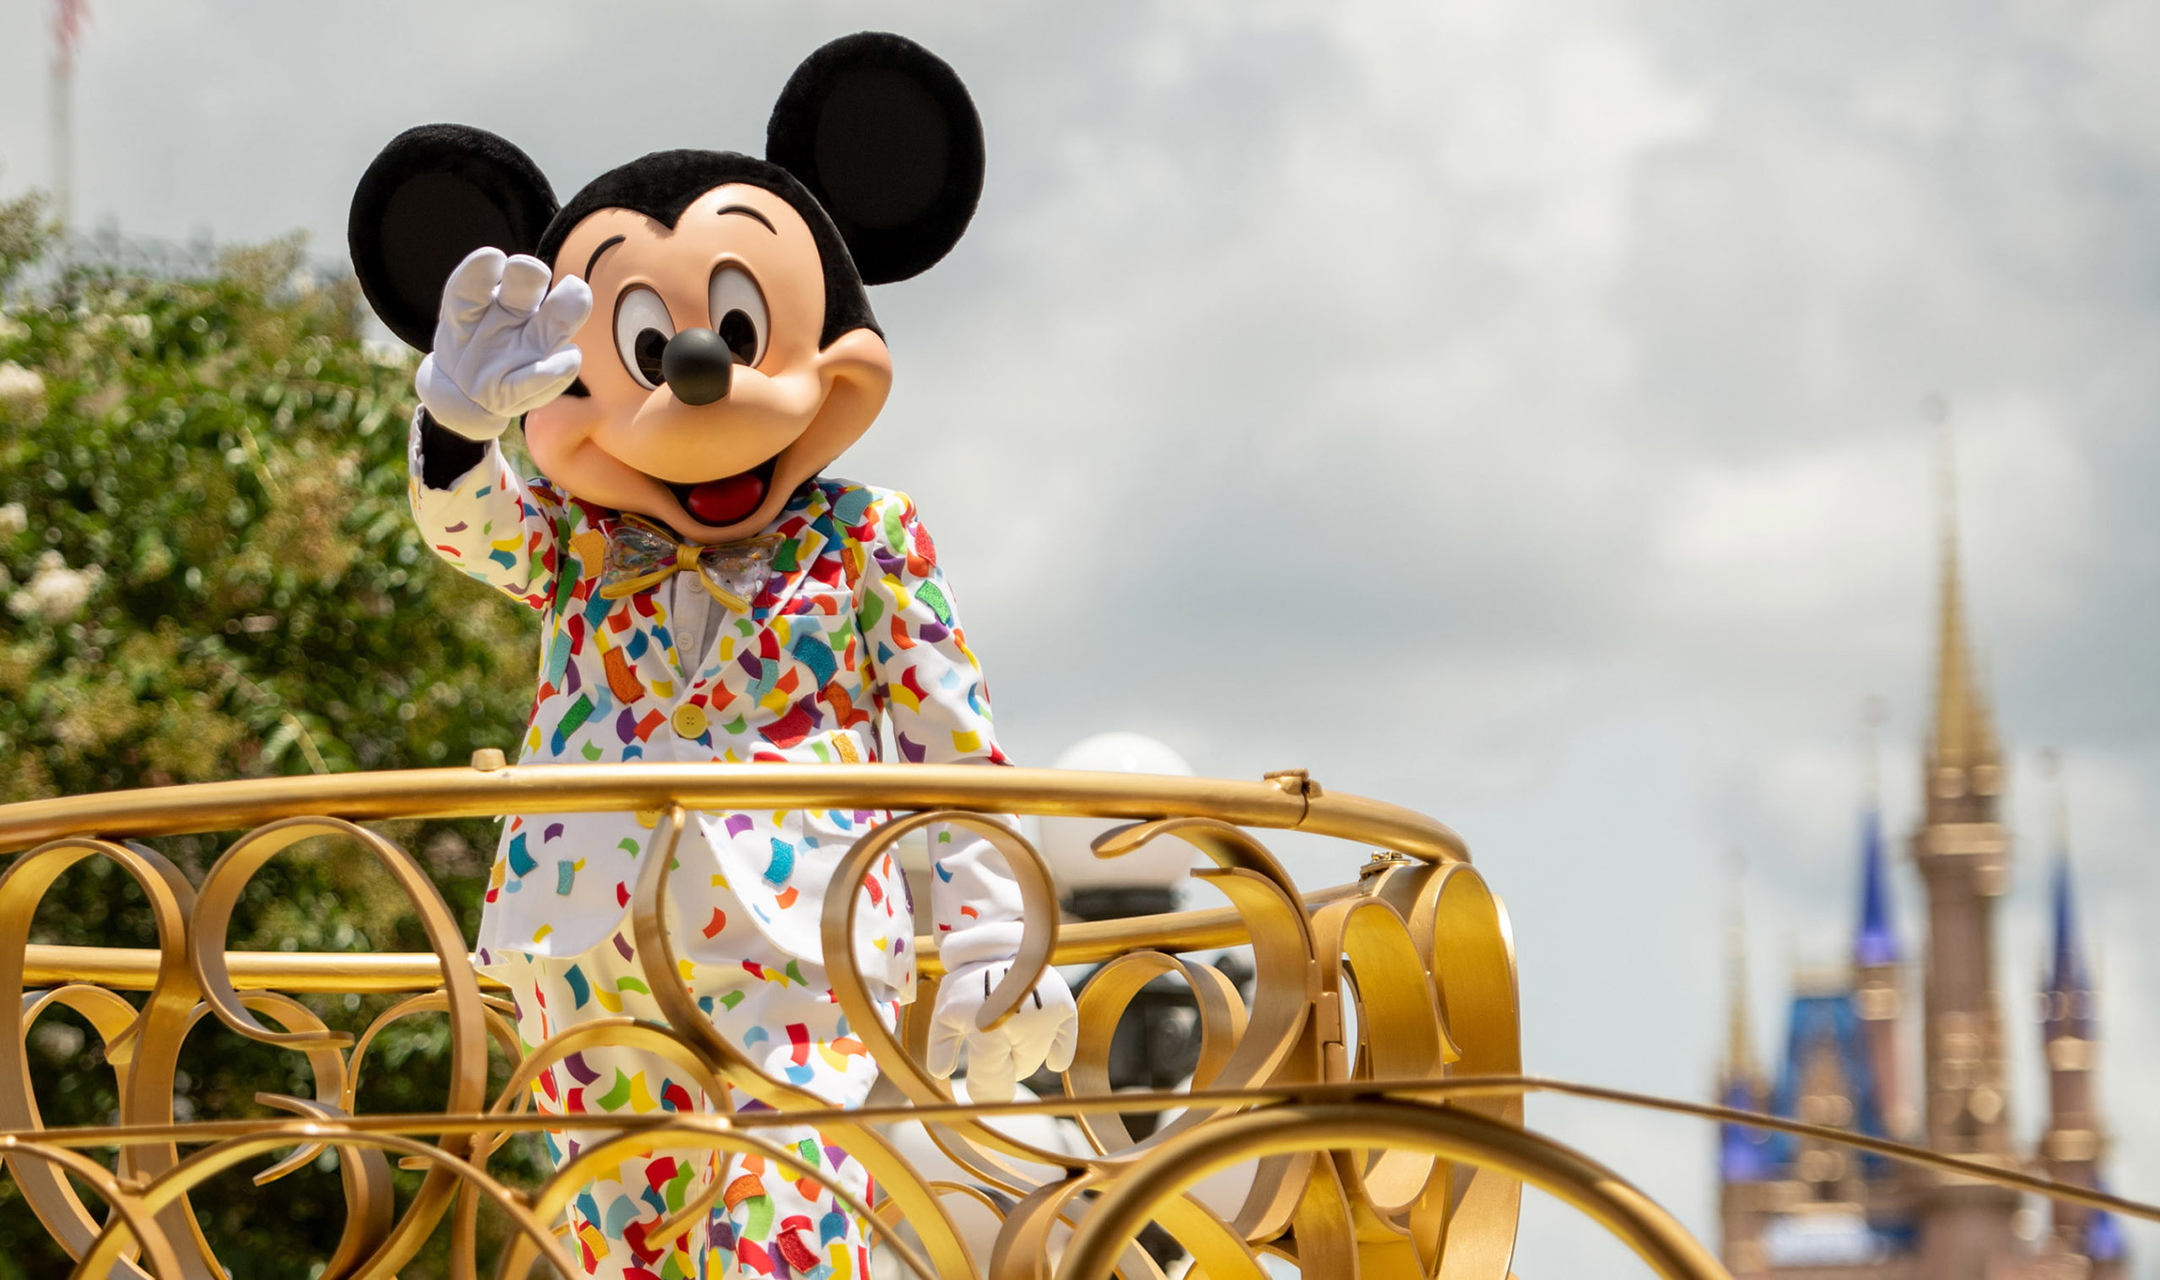 Performer dressed as Mickey Mouse stands on a parade float at Disney World